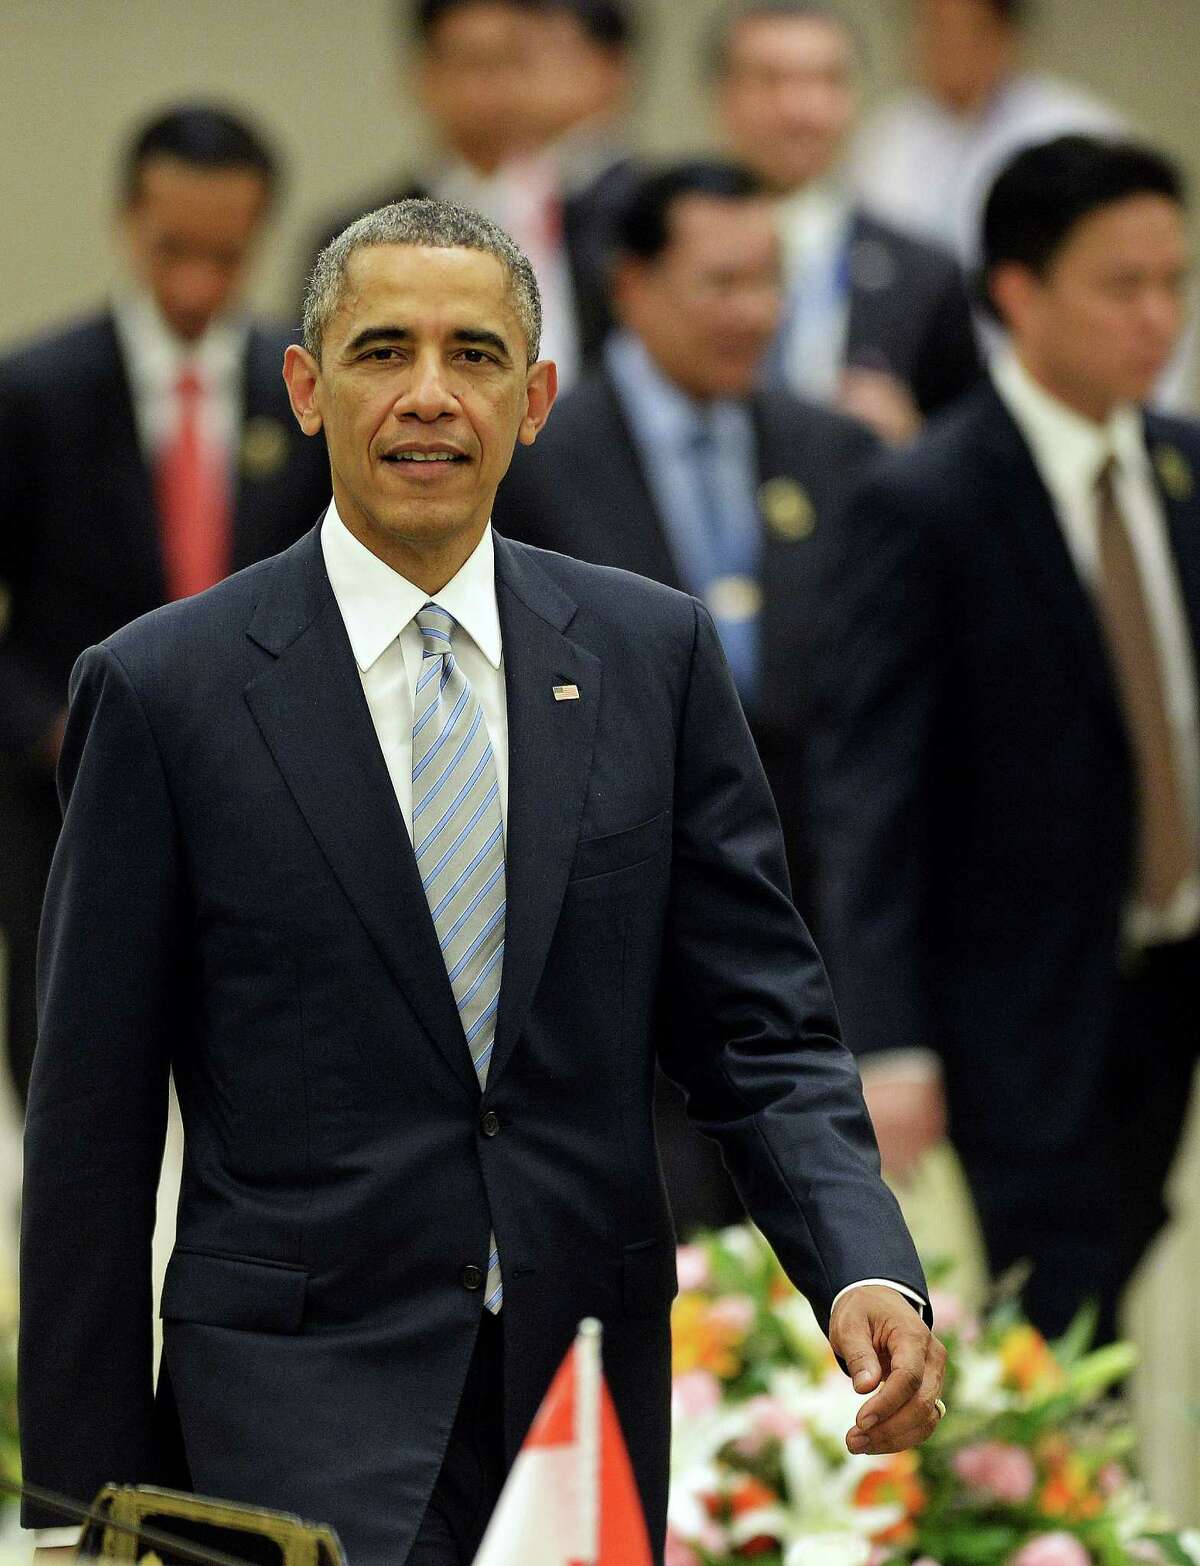 US President Barack Obama walks back to his seat after posing for a "family picture" during the 2nd ASEAN-US Summit at the Myanmar International Convention Center in Myanmar's capital Naypyidaw on November 13, 2014. The Association of Southeast Asian Nations (ASEAN) and East Asia summits, held in the purpose-built capital of Naypyidaw this week, are the culmination of a year of diplomatic limelight for Myanmar after long decades shunted to the sidelines under its former military rulers. AFP PHOTO / Christophe ARCHAMBAULTCHRISTOPHE ARCHAMBAULT/AFP/Getty Images